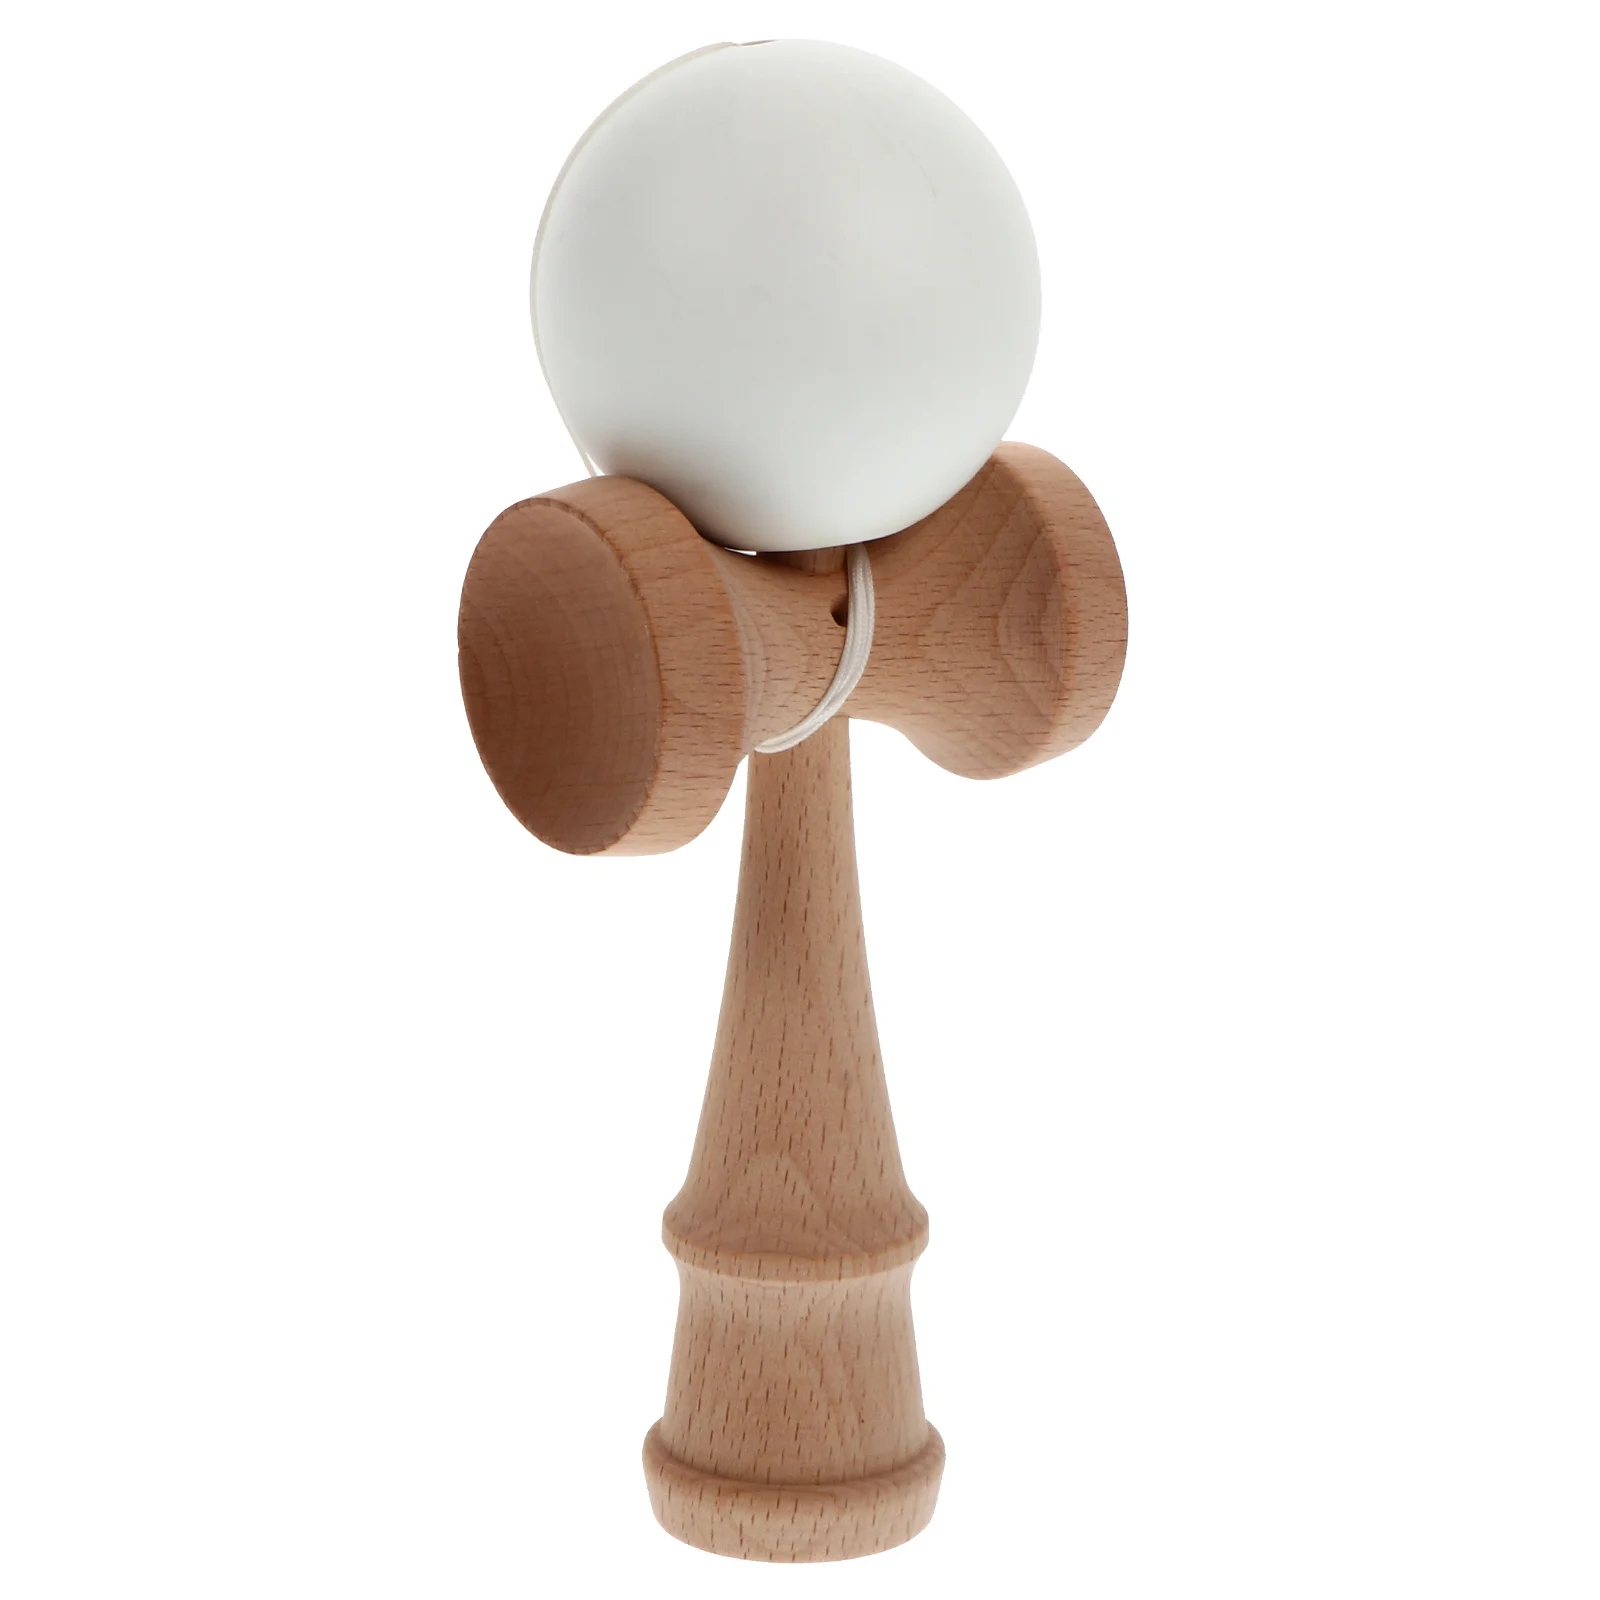 

Kendama Outdoor Playsets Toddlers Toy Kid Toys Children Skill Ball Wooden Plaything Leisure